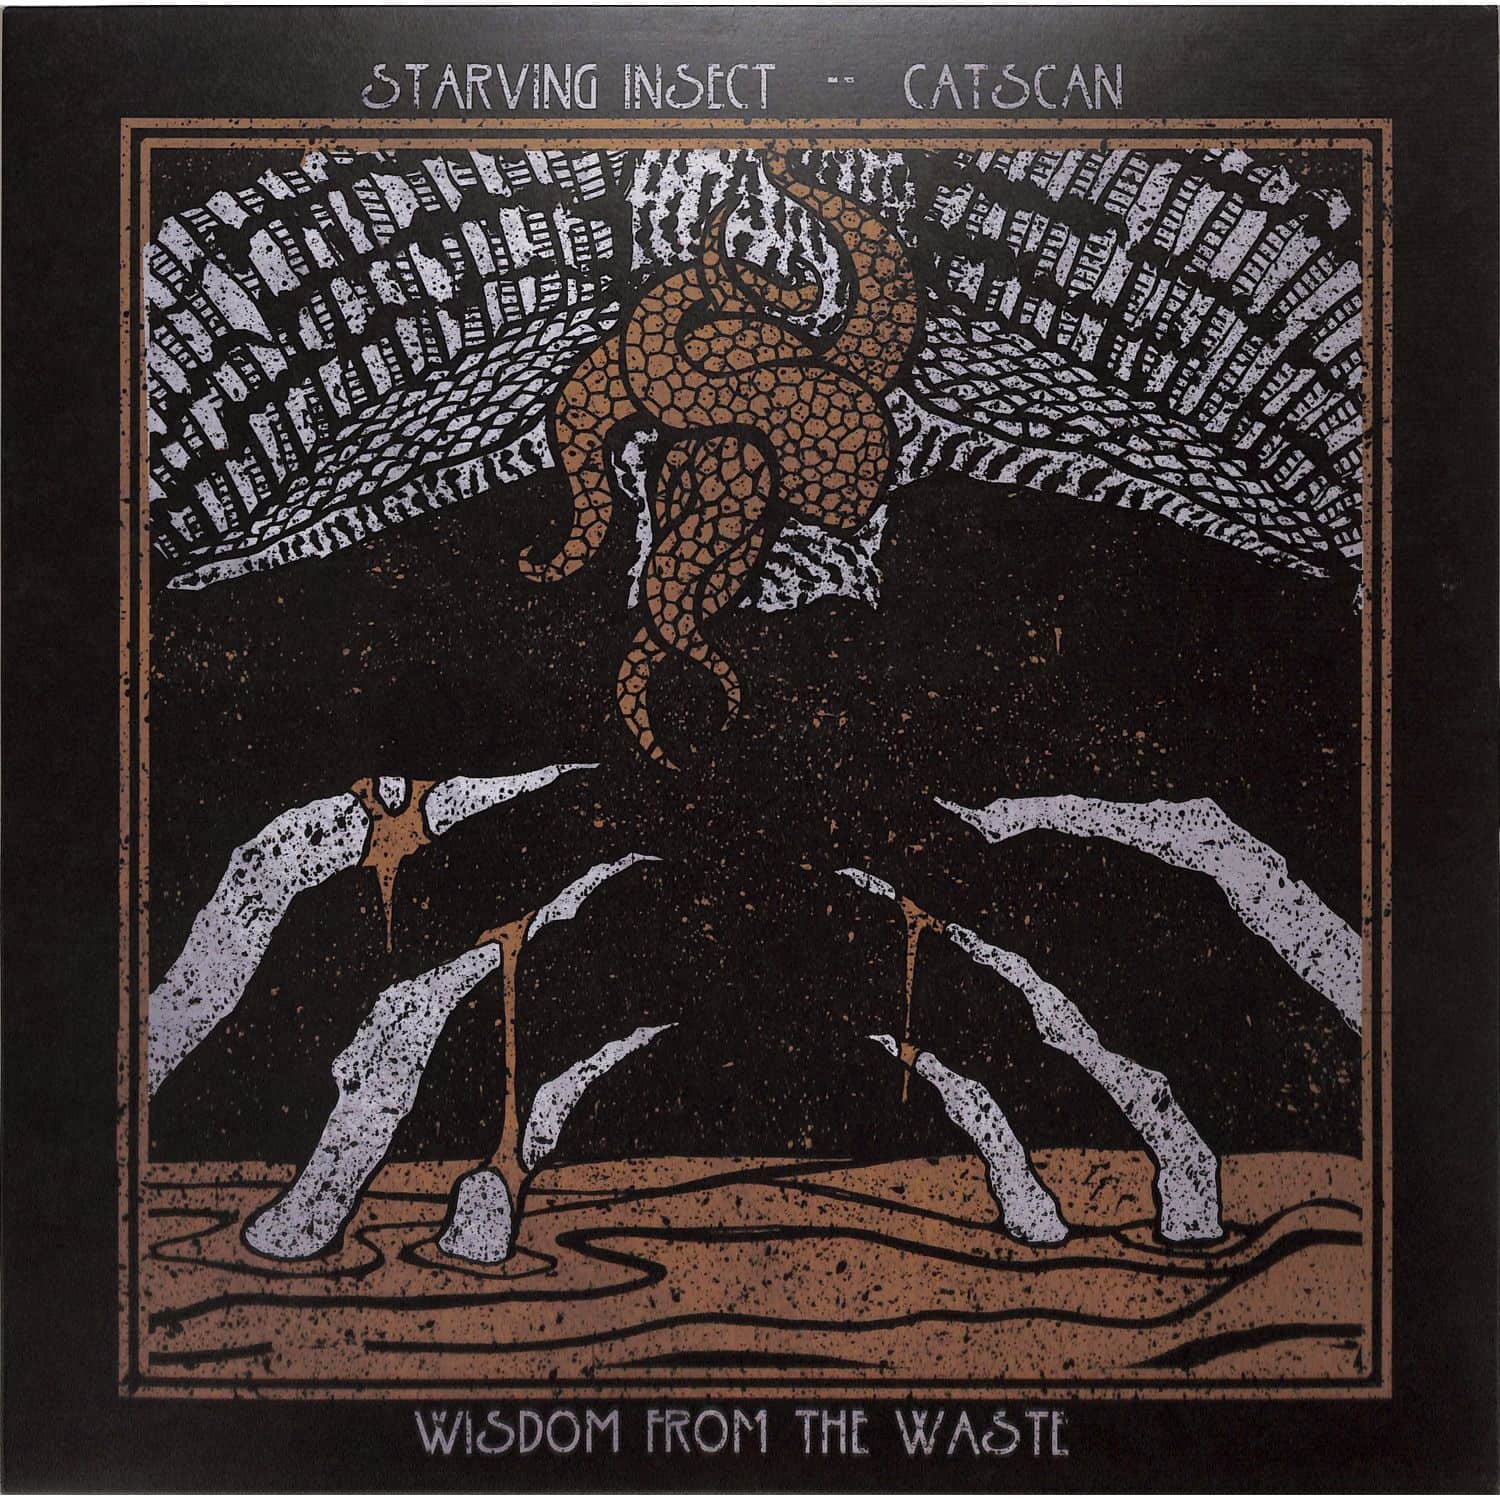 Starving Insect & Catscan - WISDOM FROM THE WASTE